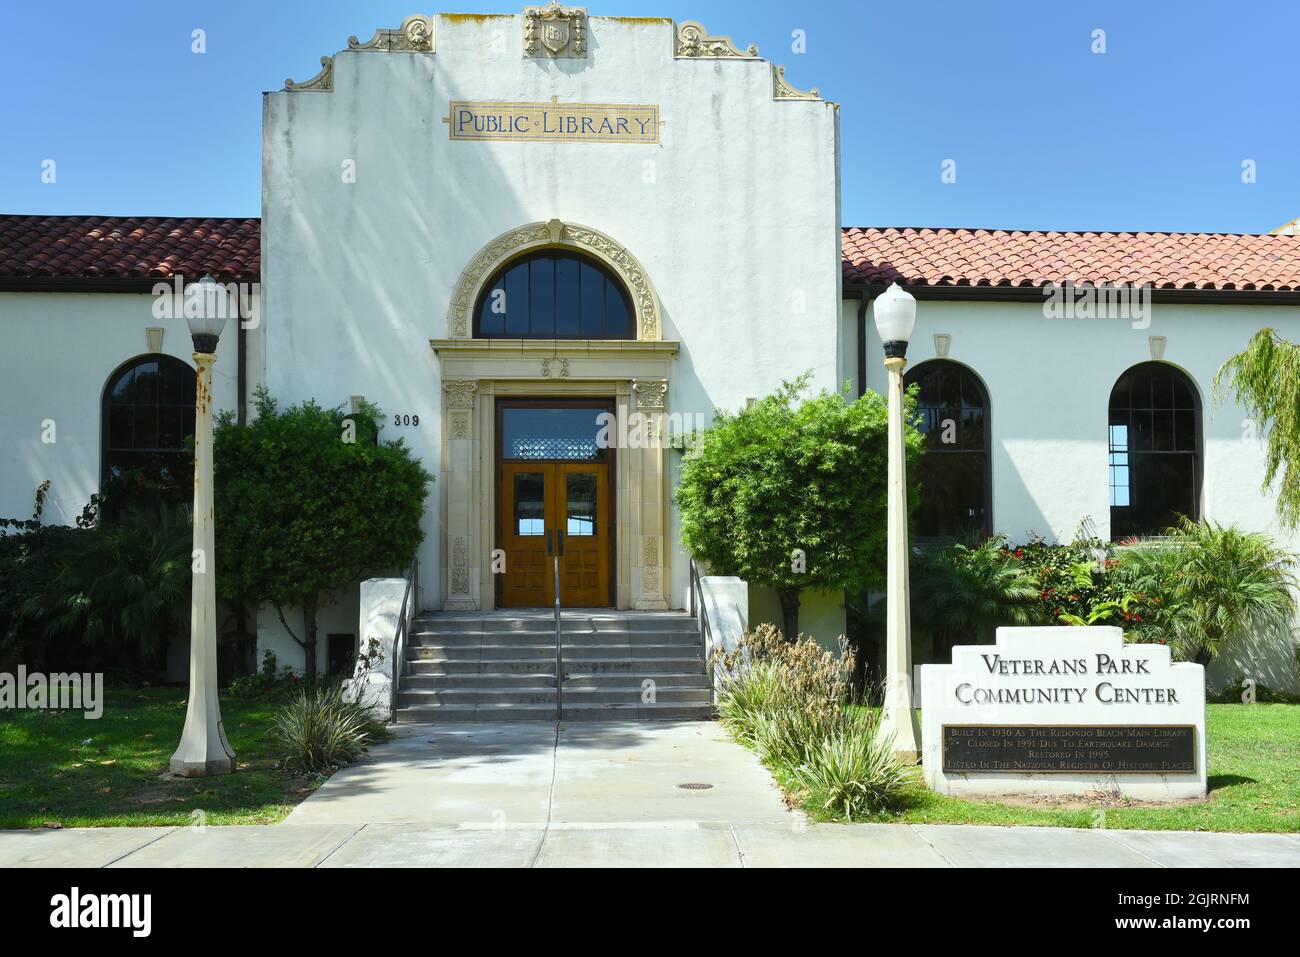 REDONDO BEACH, CALIFORNIA - 10 SEP 2021: The Veterans Park Community Center in the Old Library Building. Stock Photo